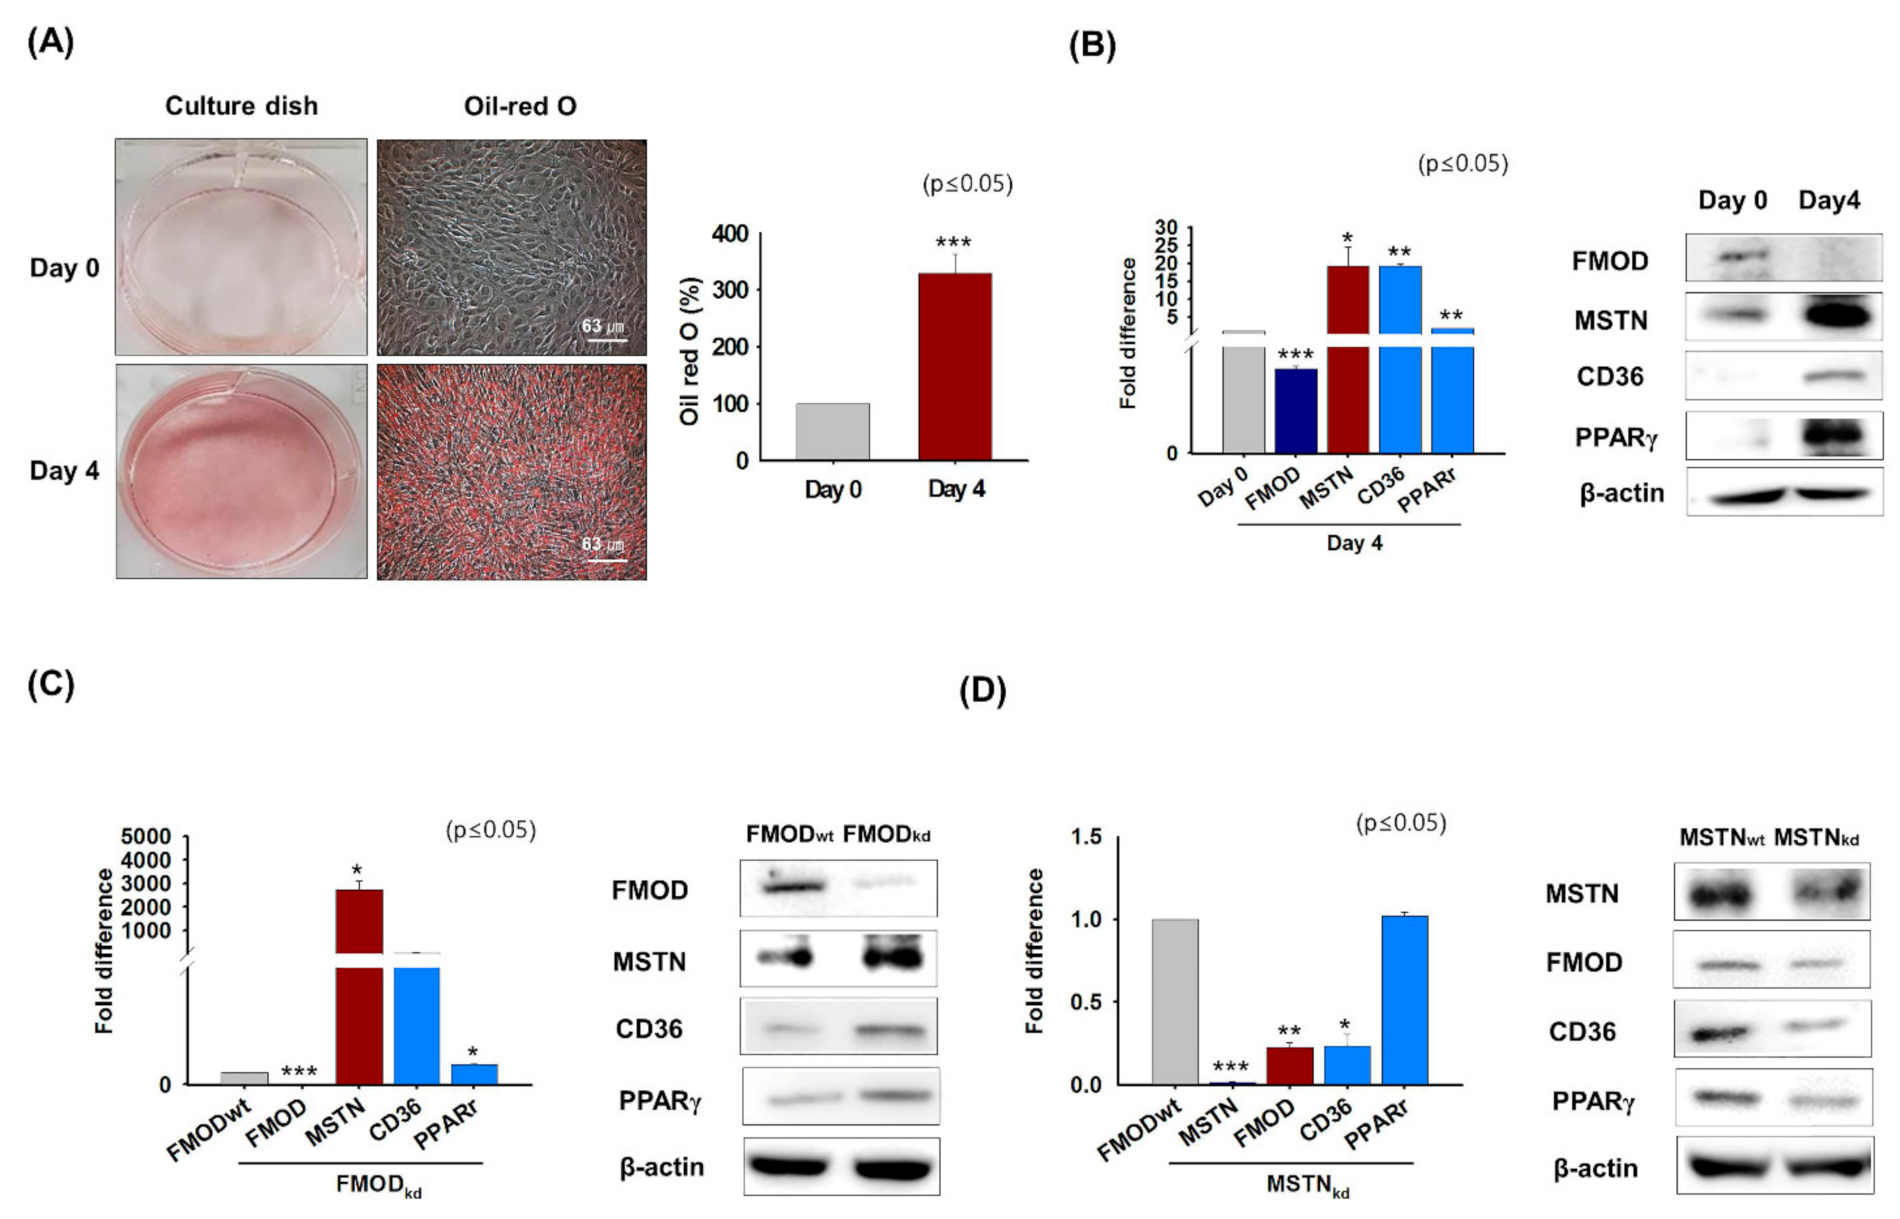 Cells Free Full Text Interaction Of Fibromodulin And Myostatin To Regulate Skeletal Muscle Aging An Opposite Regulation In Muscle Aging Diabetes And Intracellular Lipid Accumulation Html